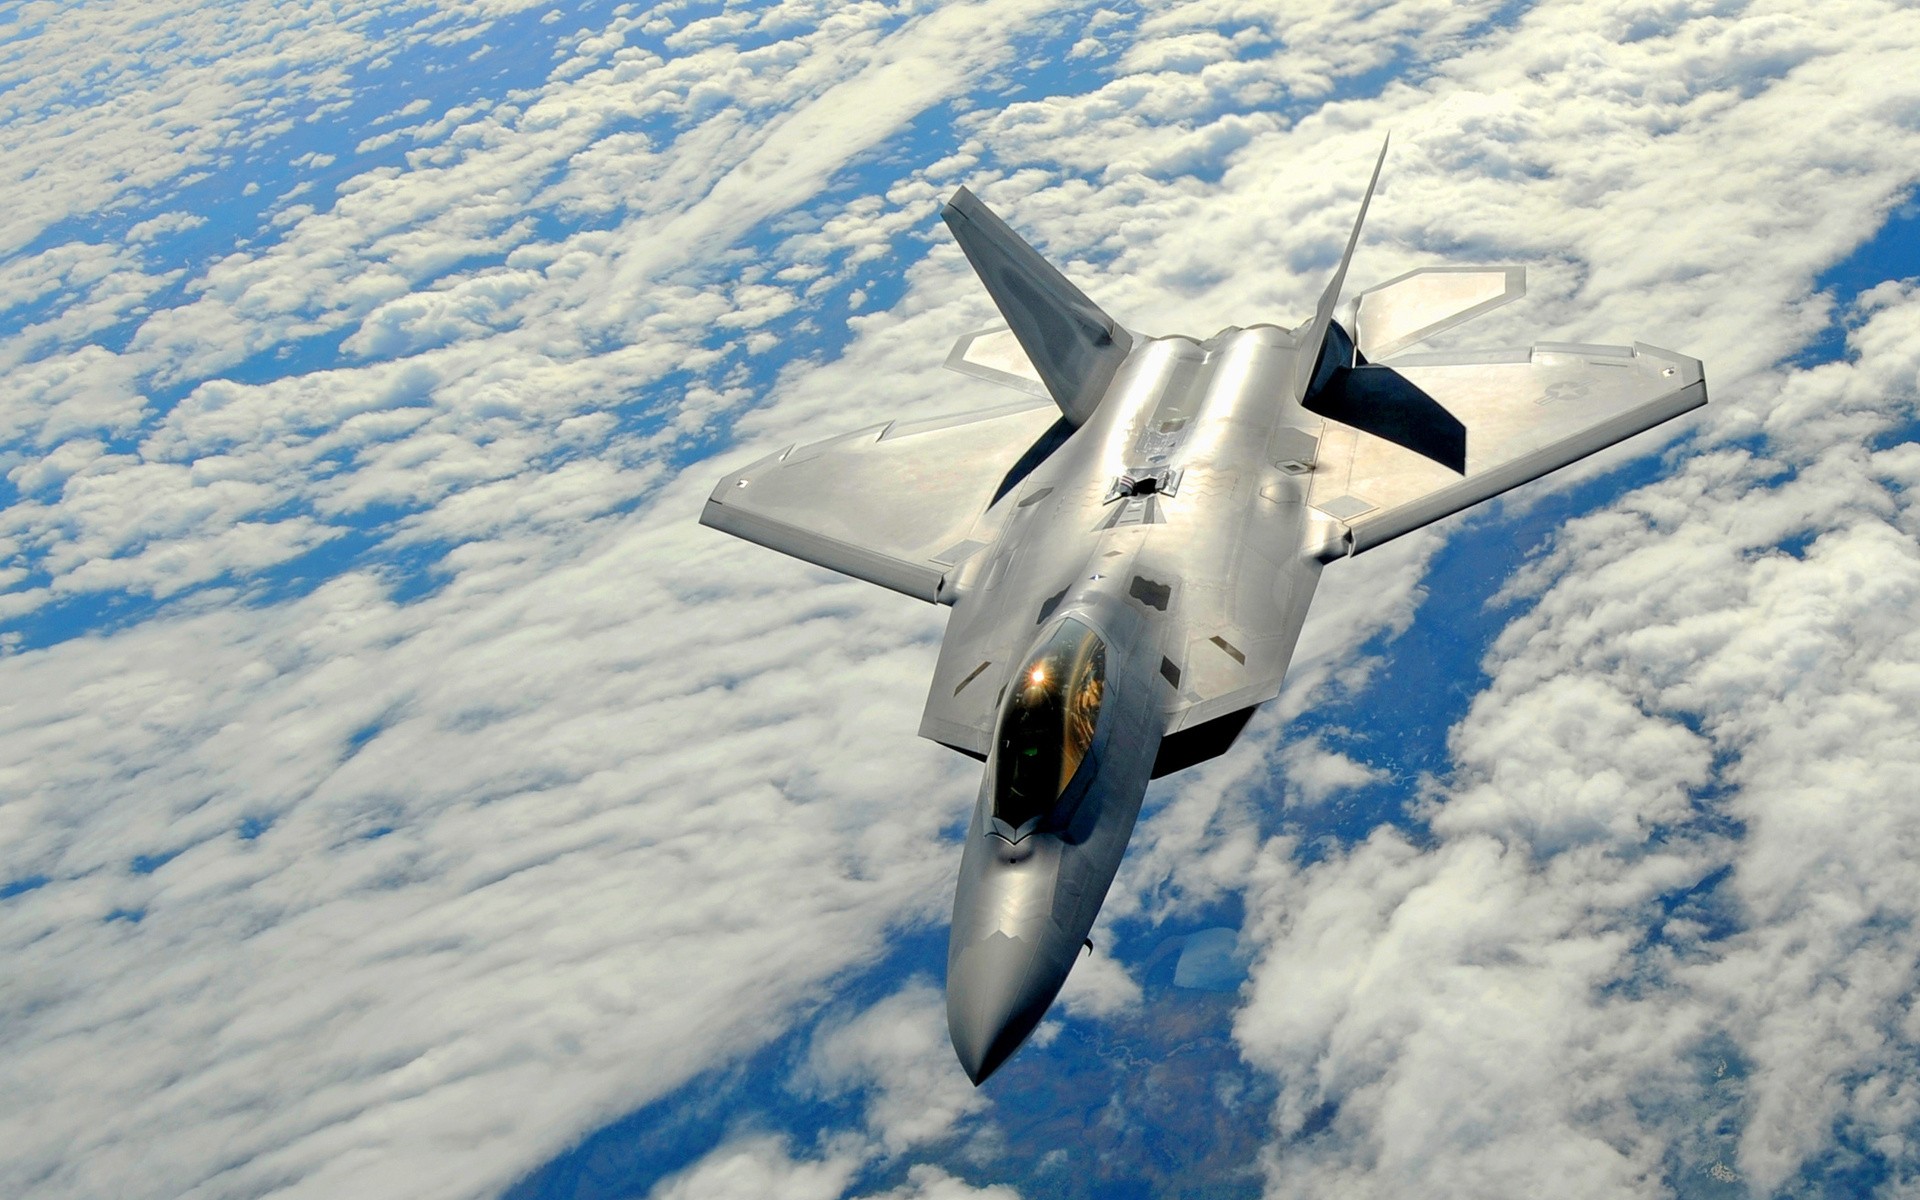 Download Wallpaper American military aircraft F22 Raptor wallpapers